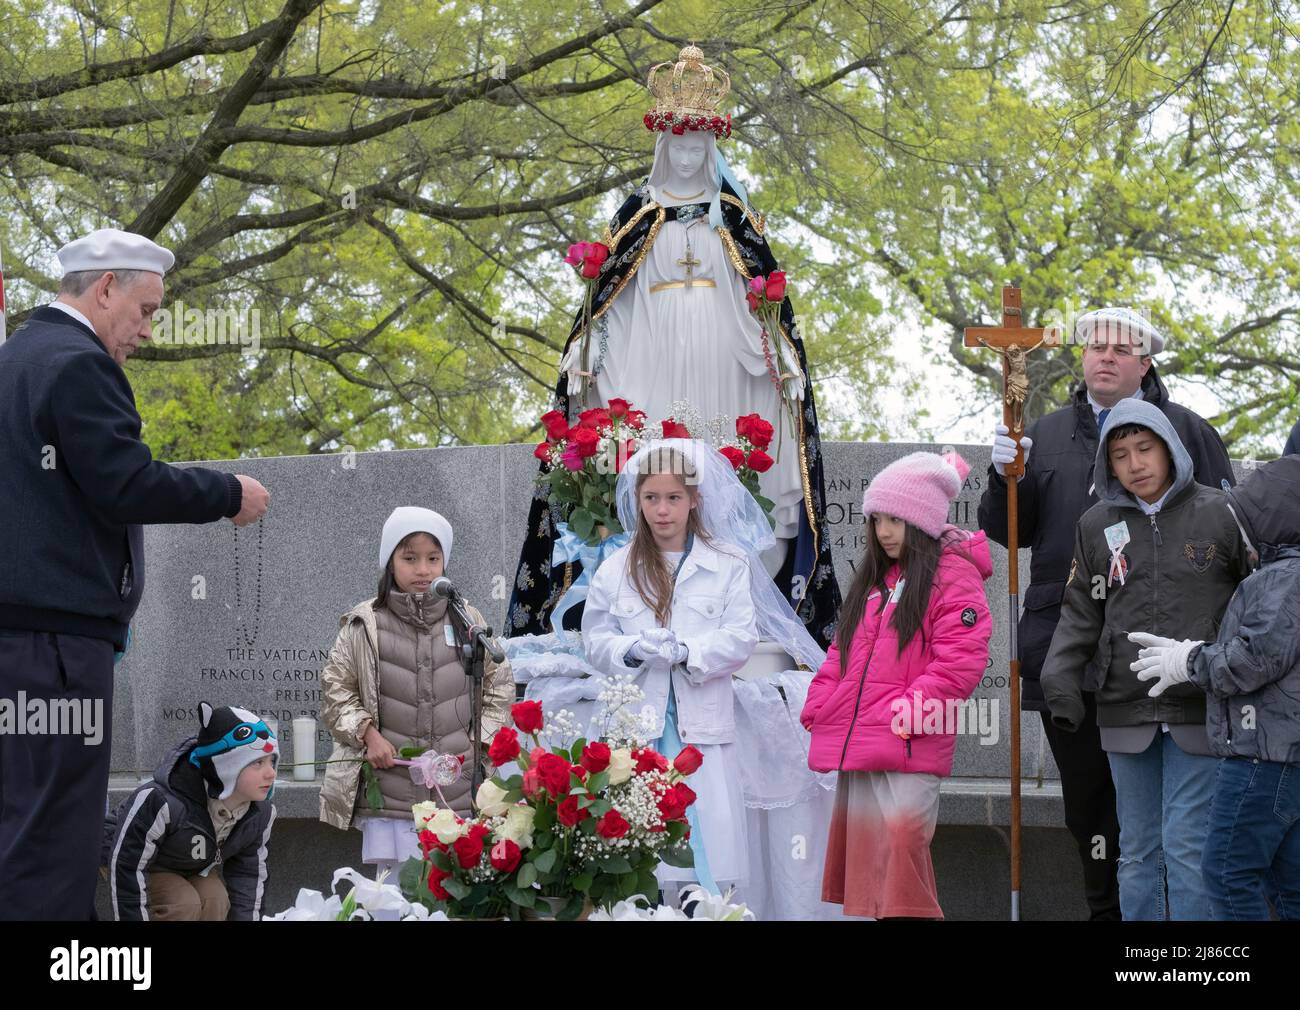 Adults & children  worship at the May Crowning event in Flushing Meadows Corona Park at the site of the Vatican Pavilion from the 1964 World's Fair. Stock Photo